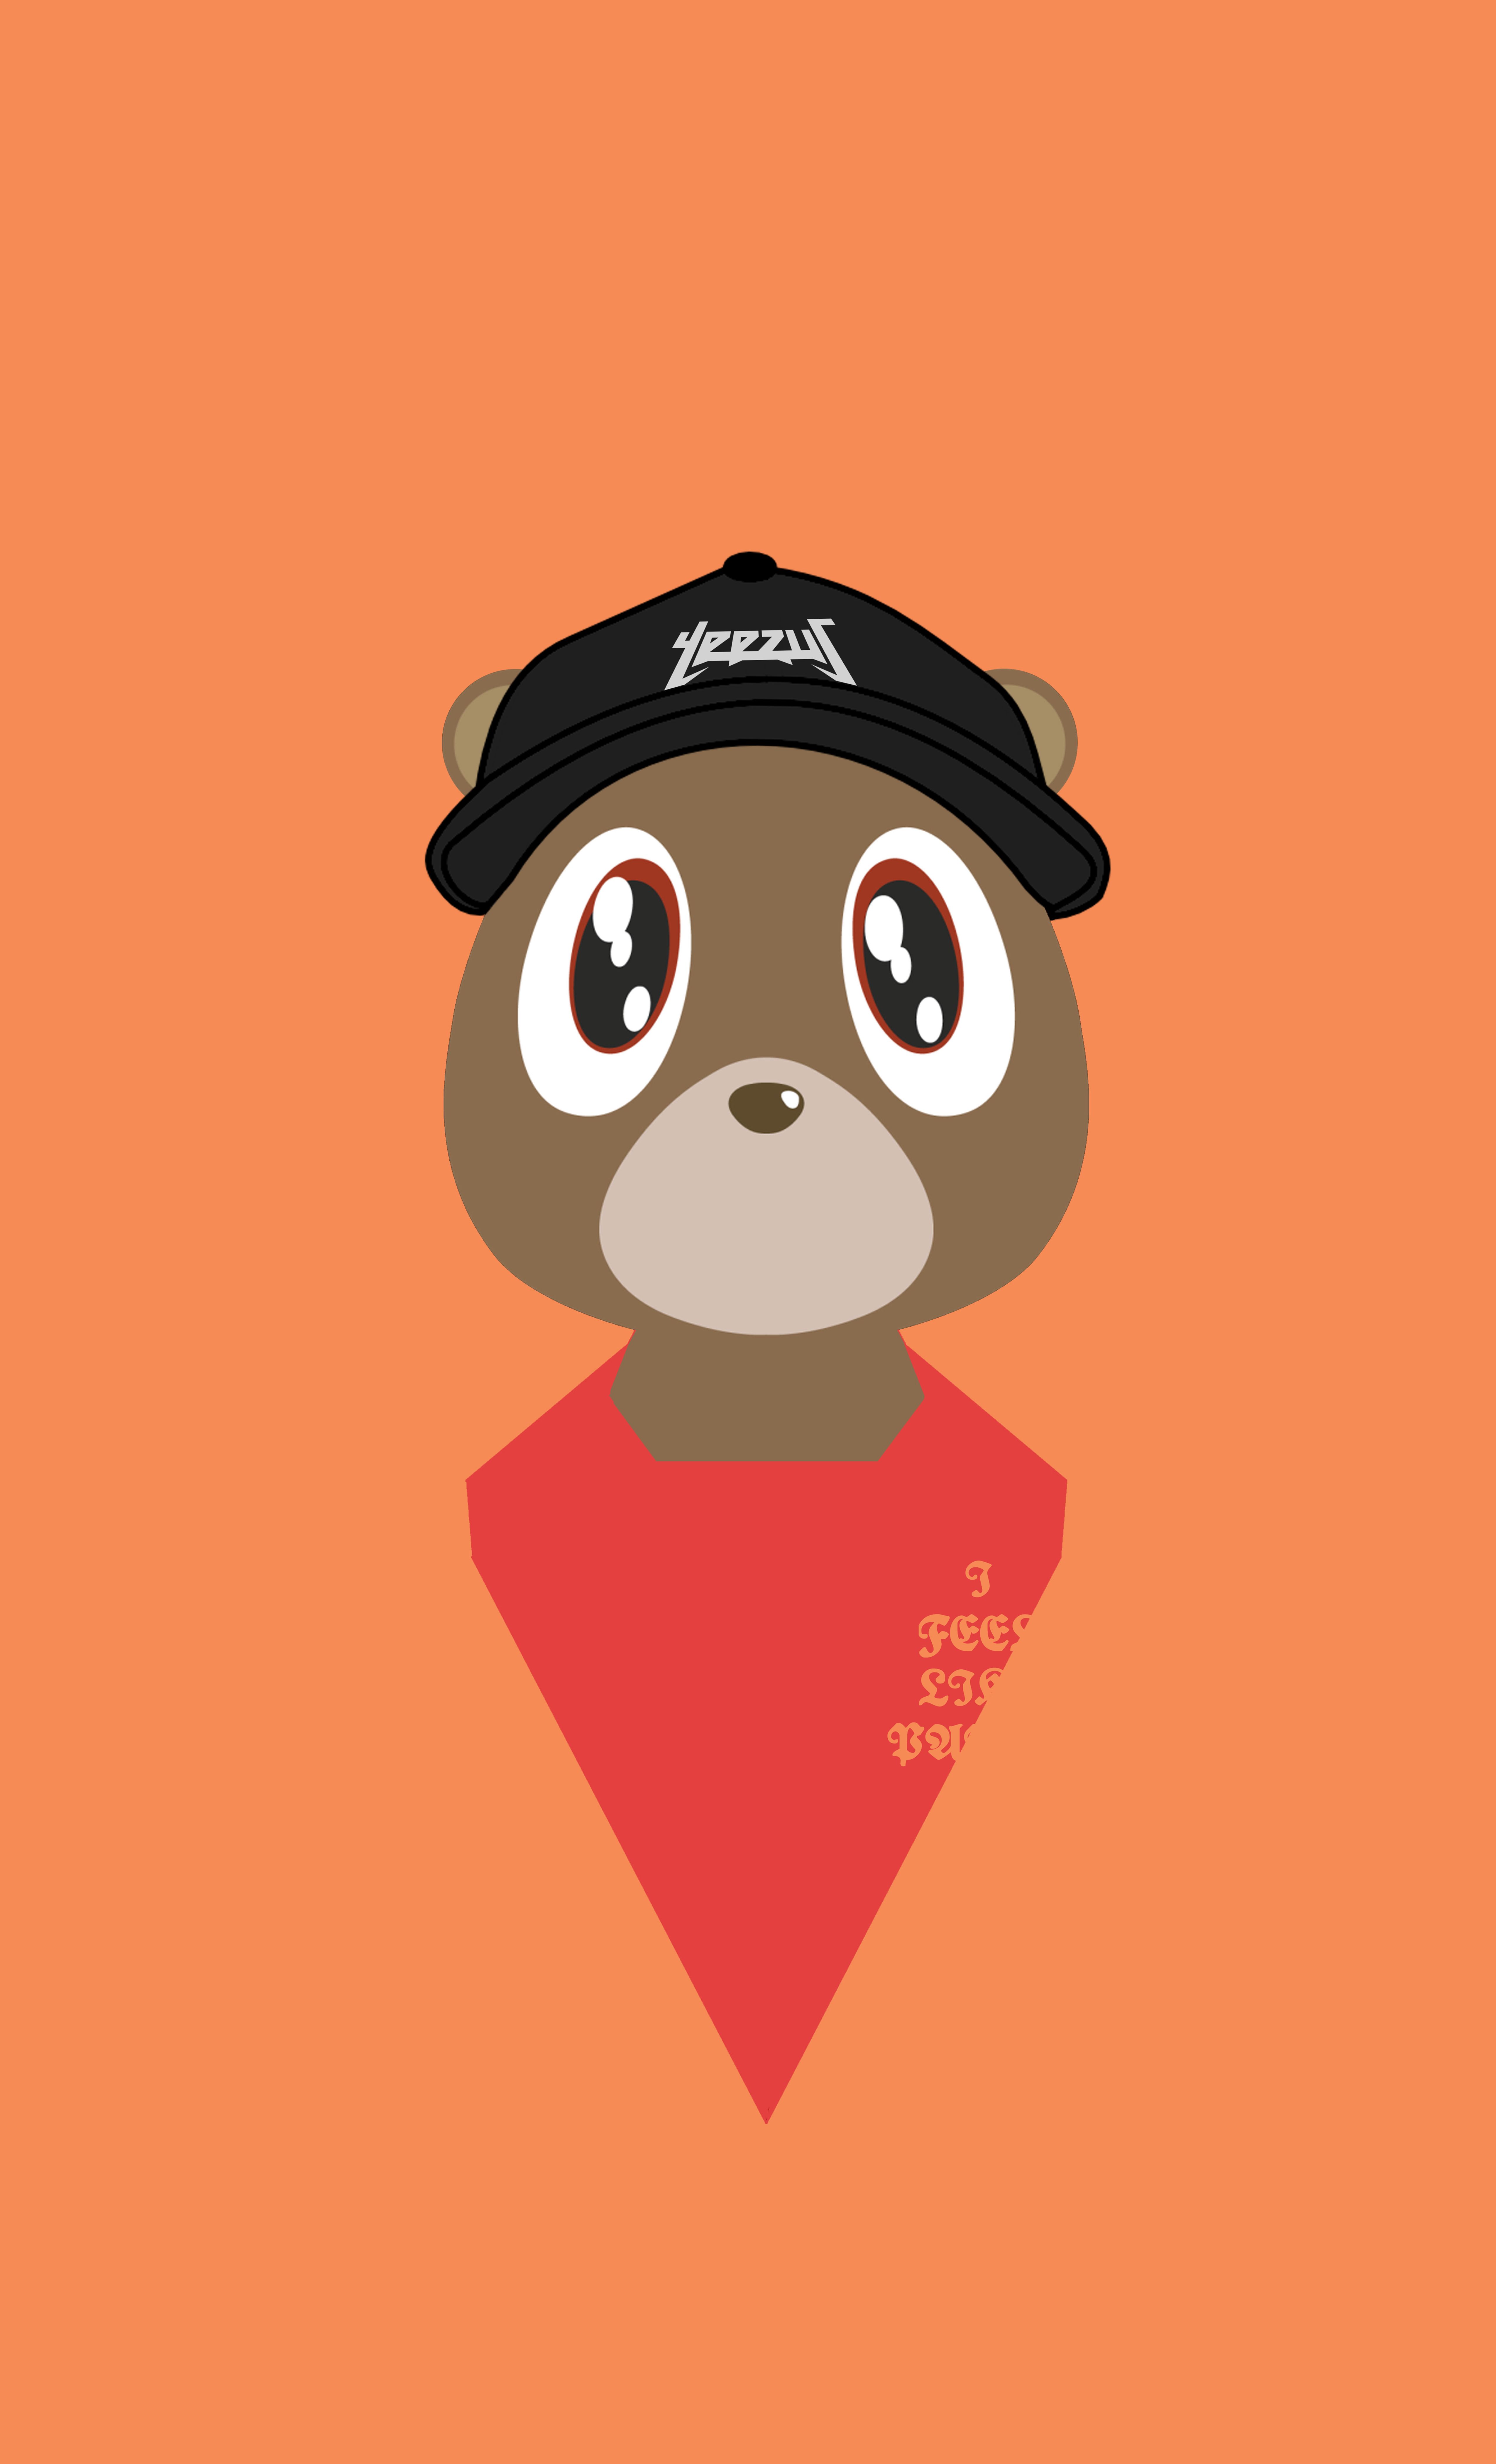 Kanye West Graduation Iphone Wallpapers